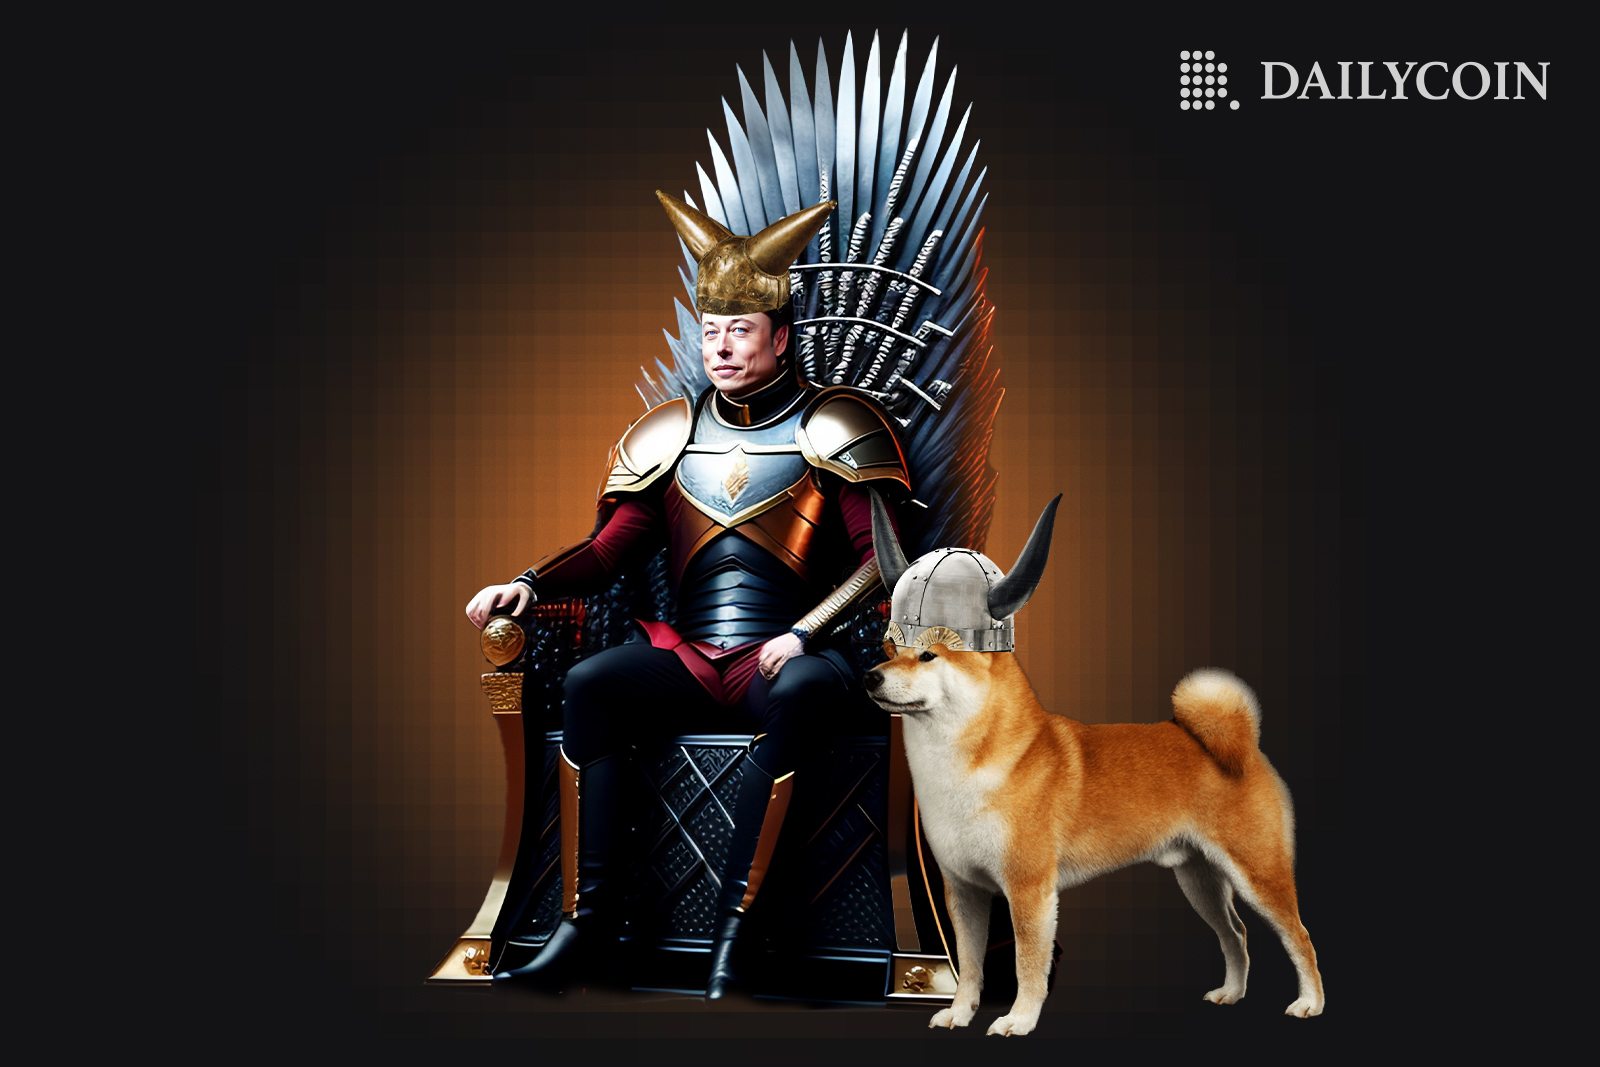 Billionaire Elon Musk sitting on a throne with a horn helmet, as a Shiba Inu dog is ready to take over the throne.